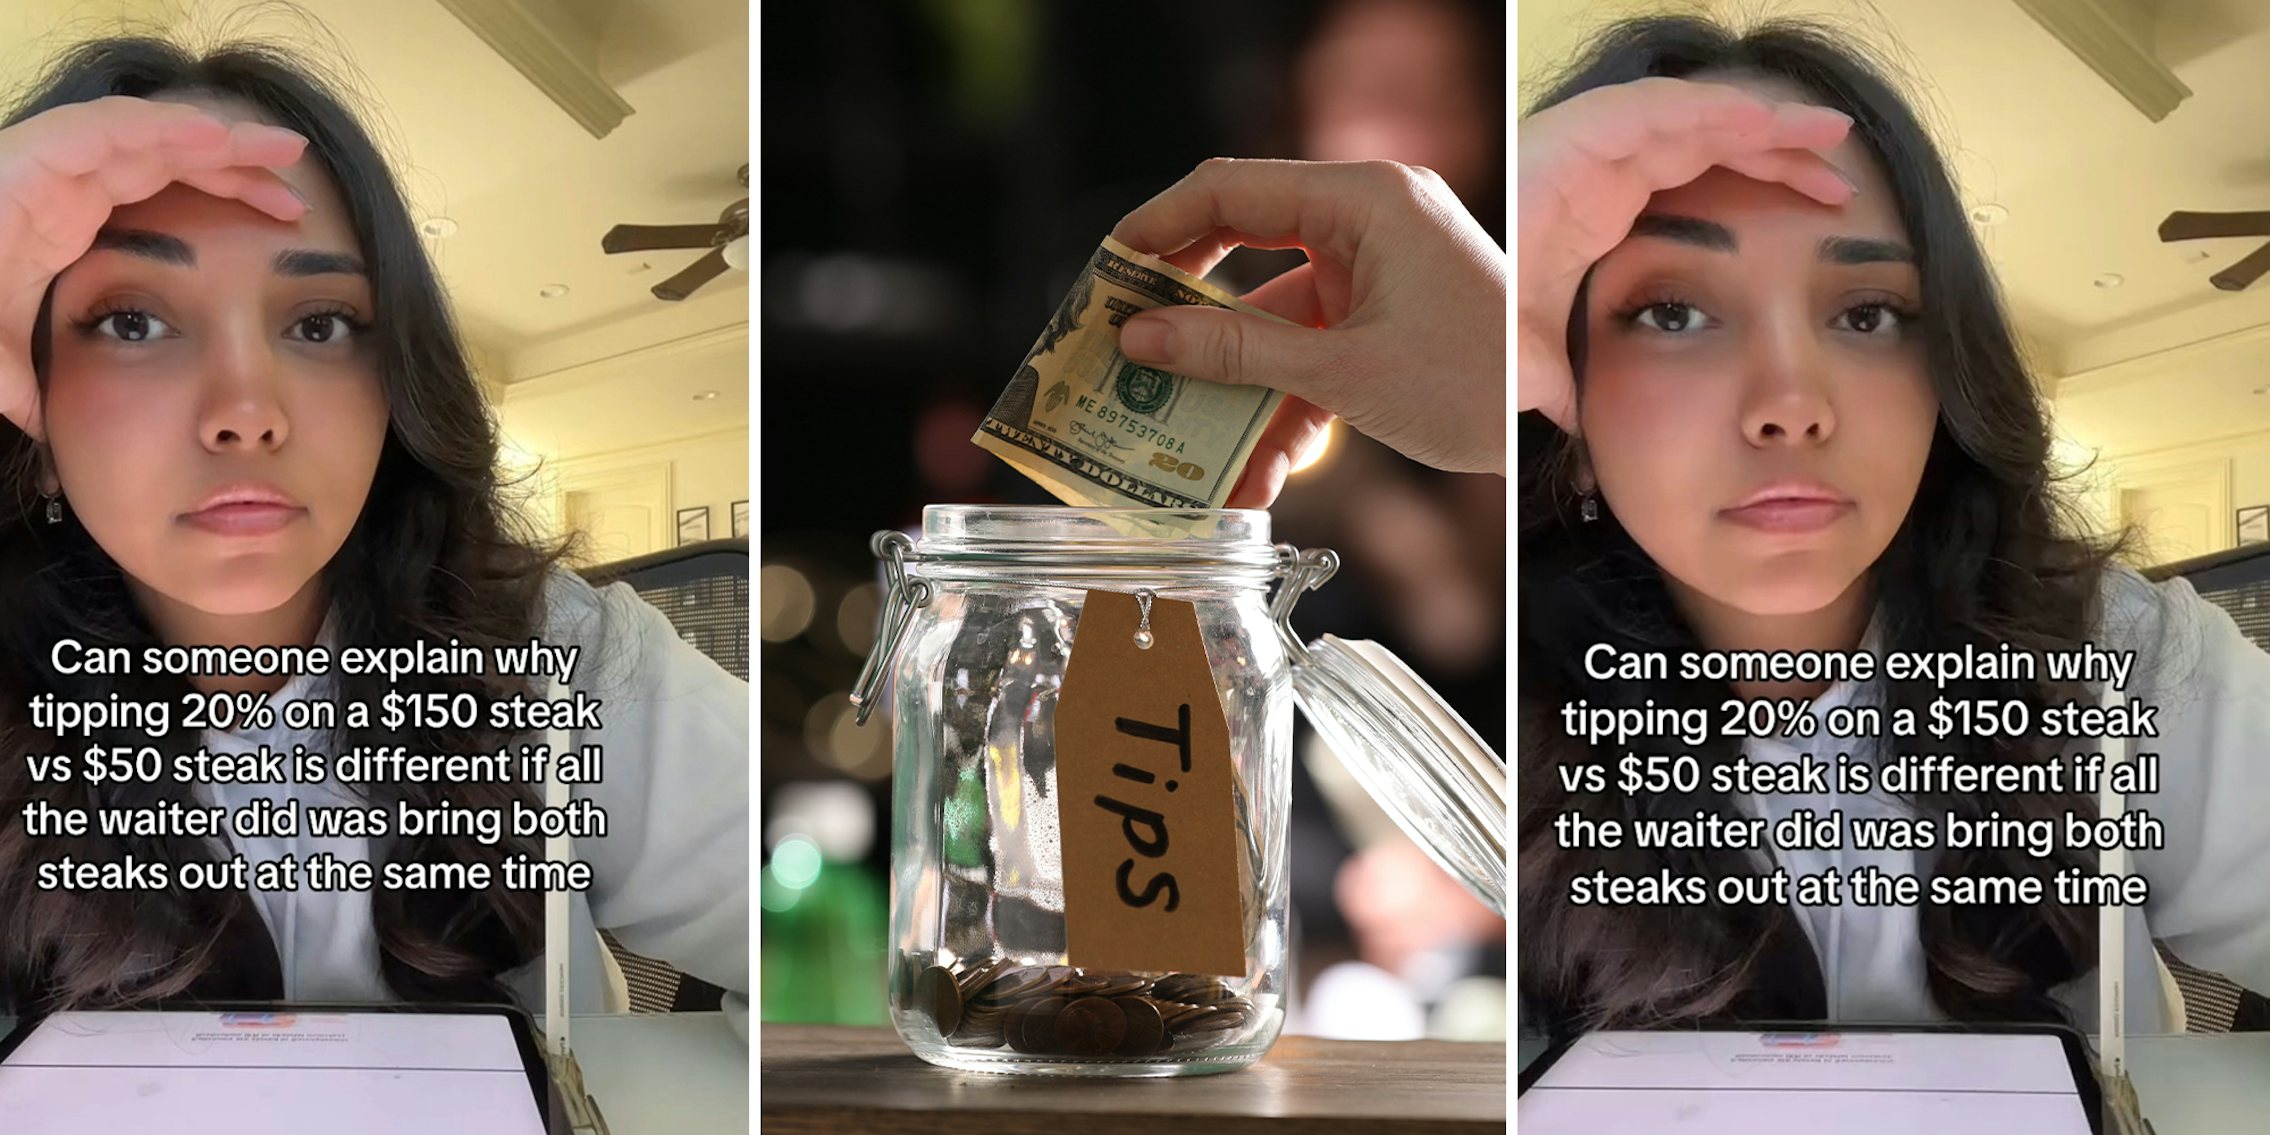 Customer questions tipping more when food is more expensive but workers put in same effort